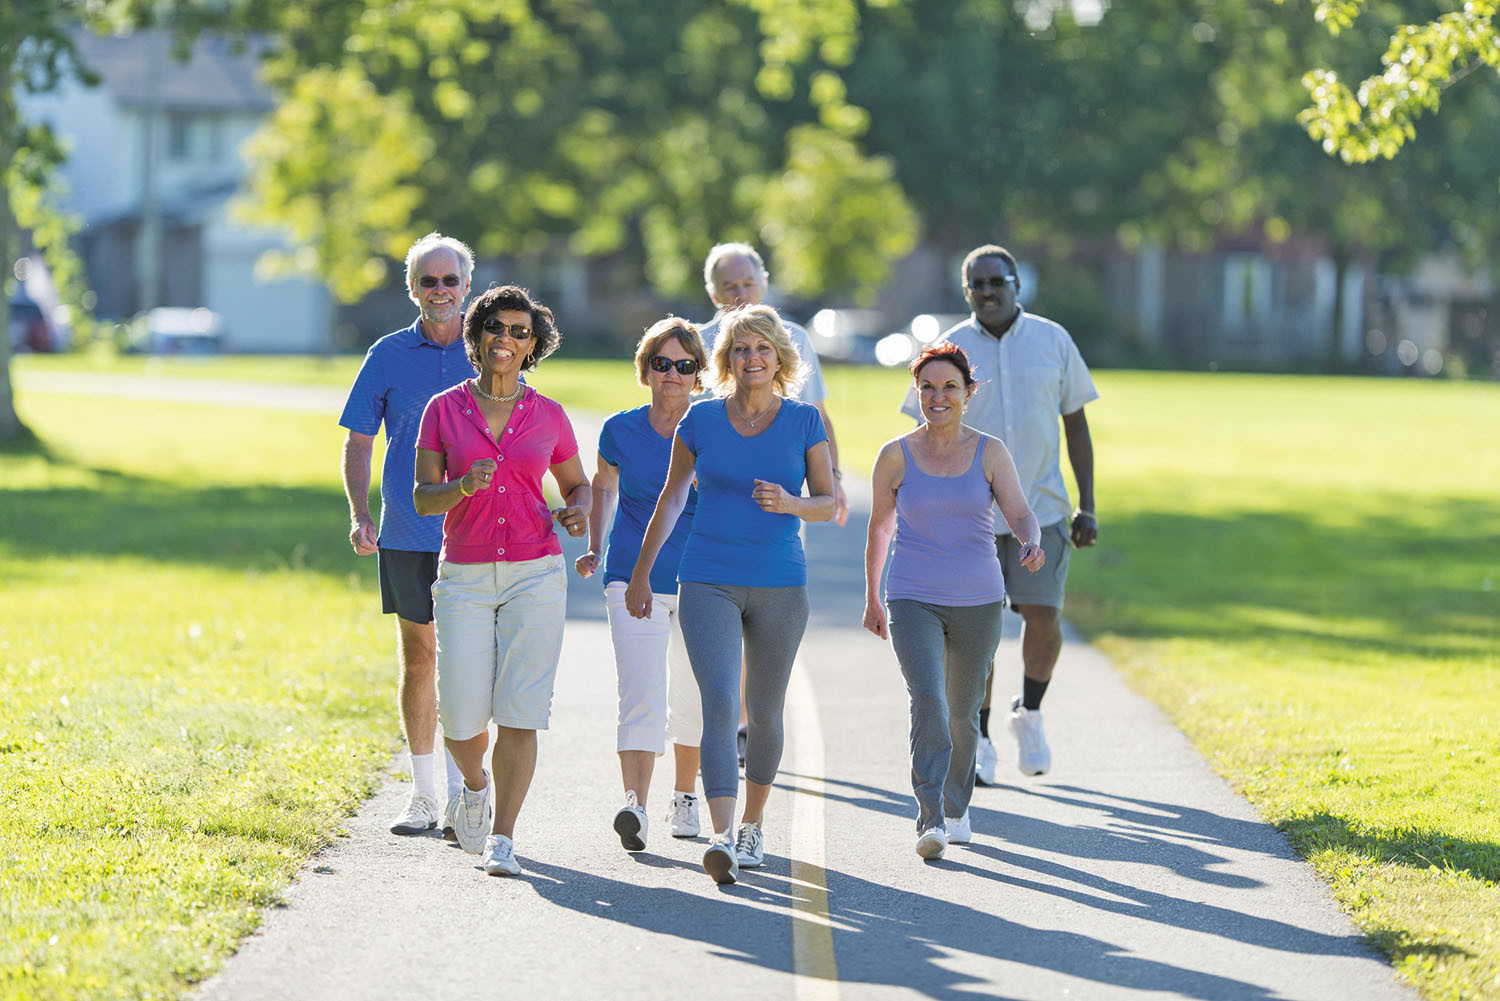 photo of a group of seven older adults fast-walking on a paved path in a park